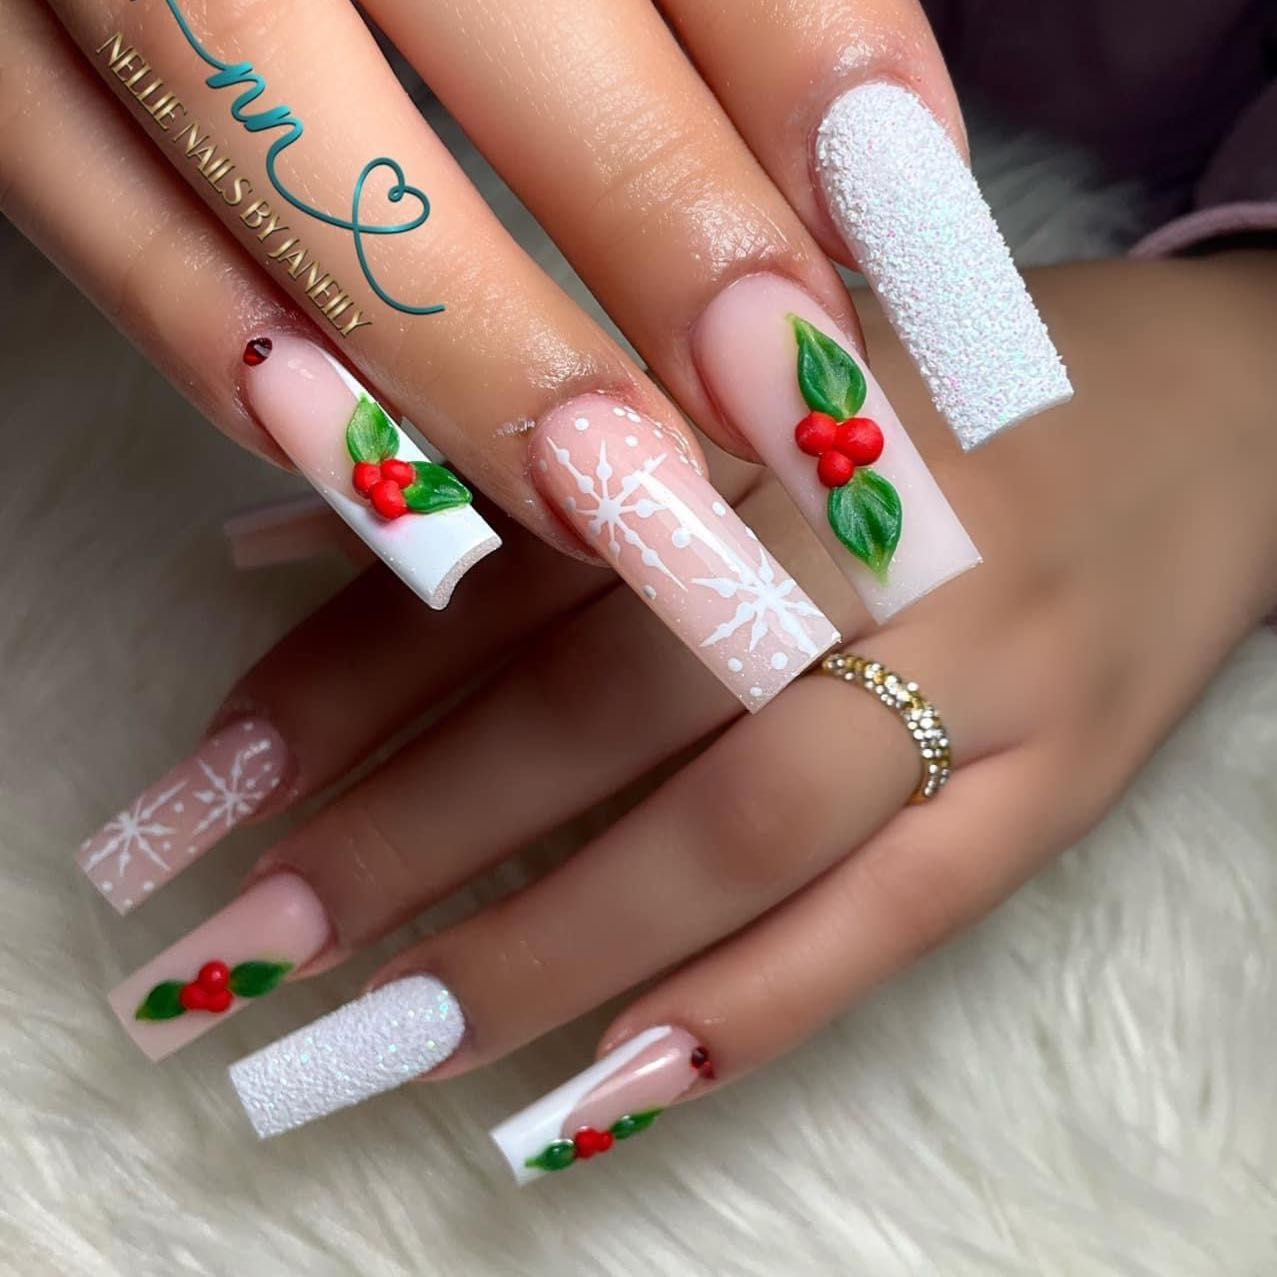 Nellie’s Nails, 4390 s 76th st, Milwaukee, 53220